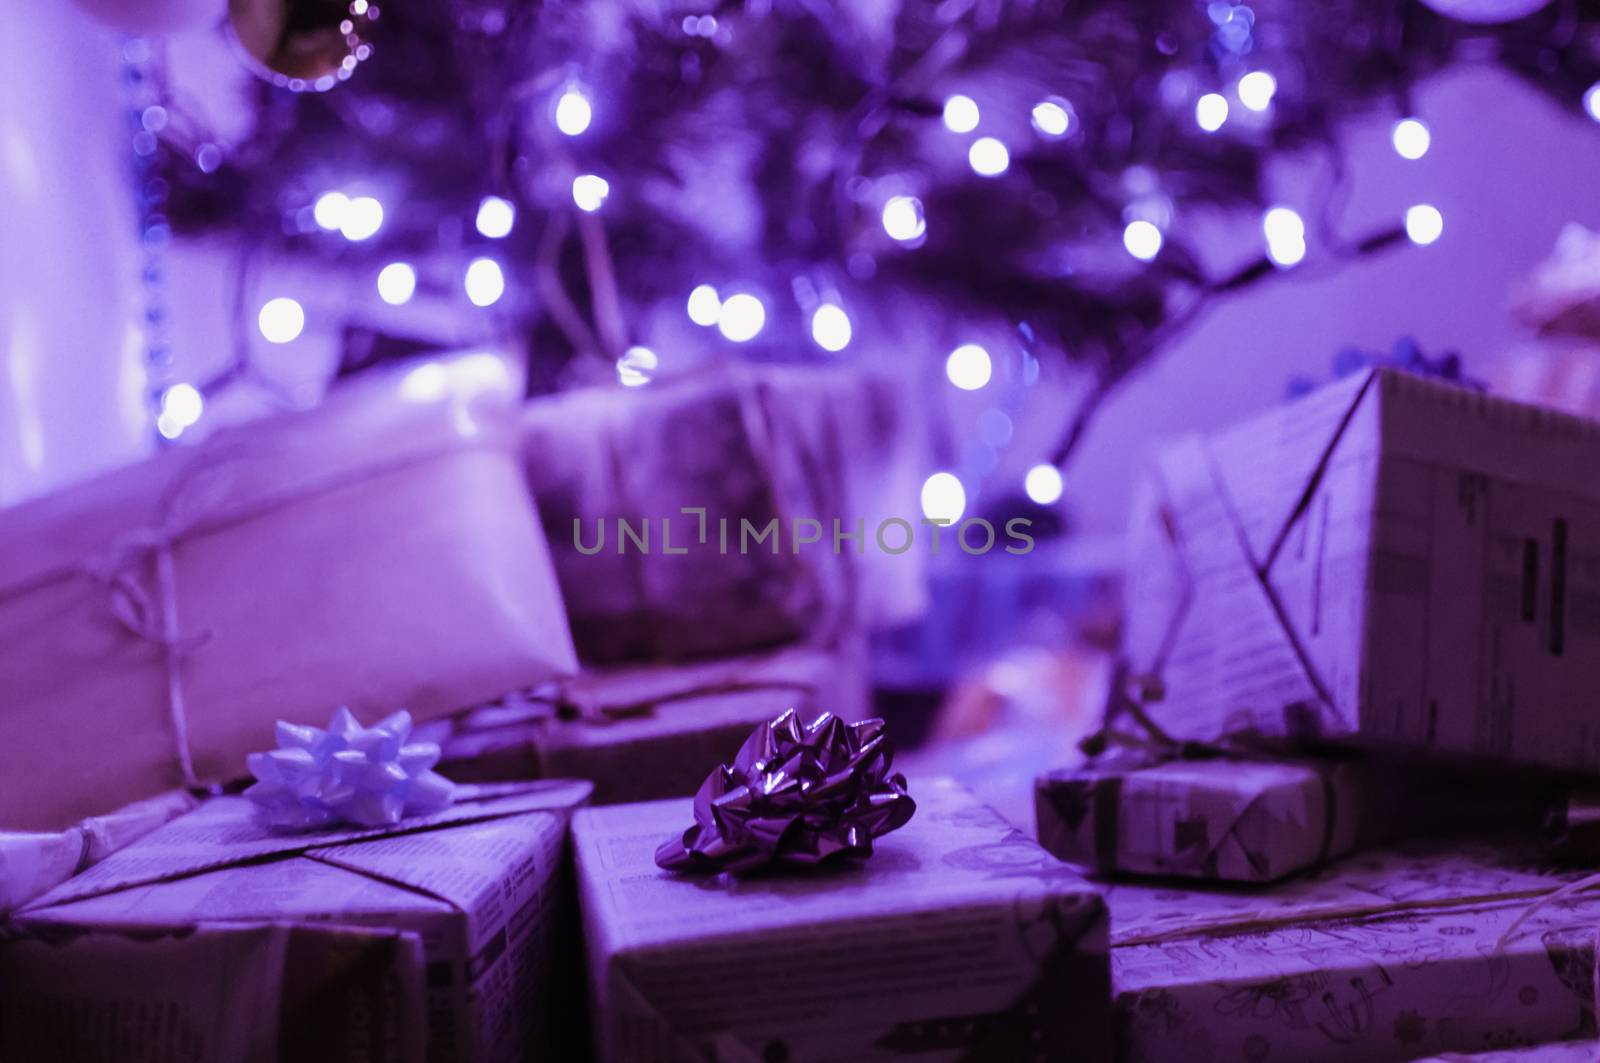 gifts packed in boxes and wrapped with festive paper with bows lie under a Christmas tree in neon light from an LED garland. The concept of winter holidays. by Alla_Morozova93